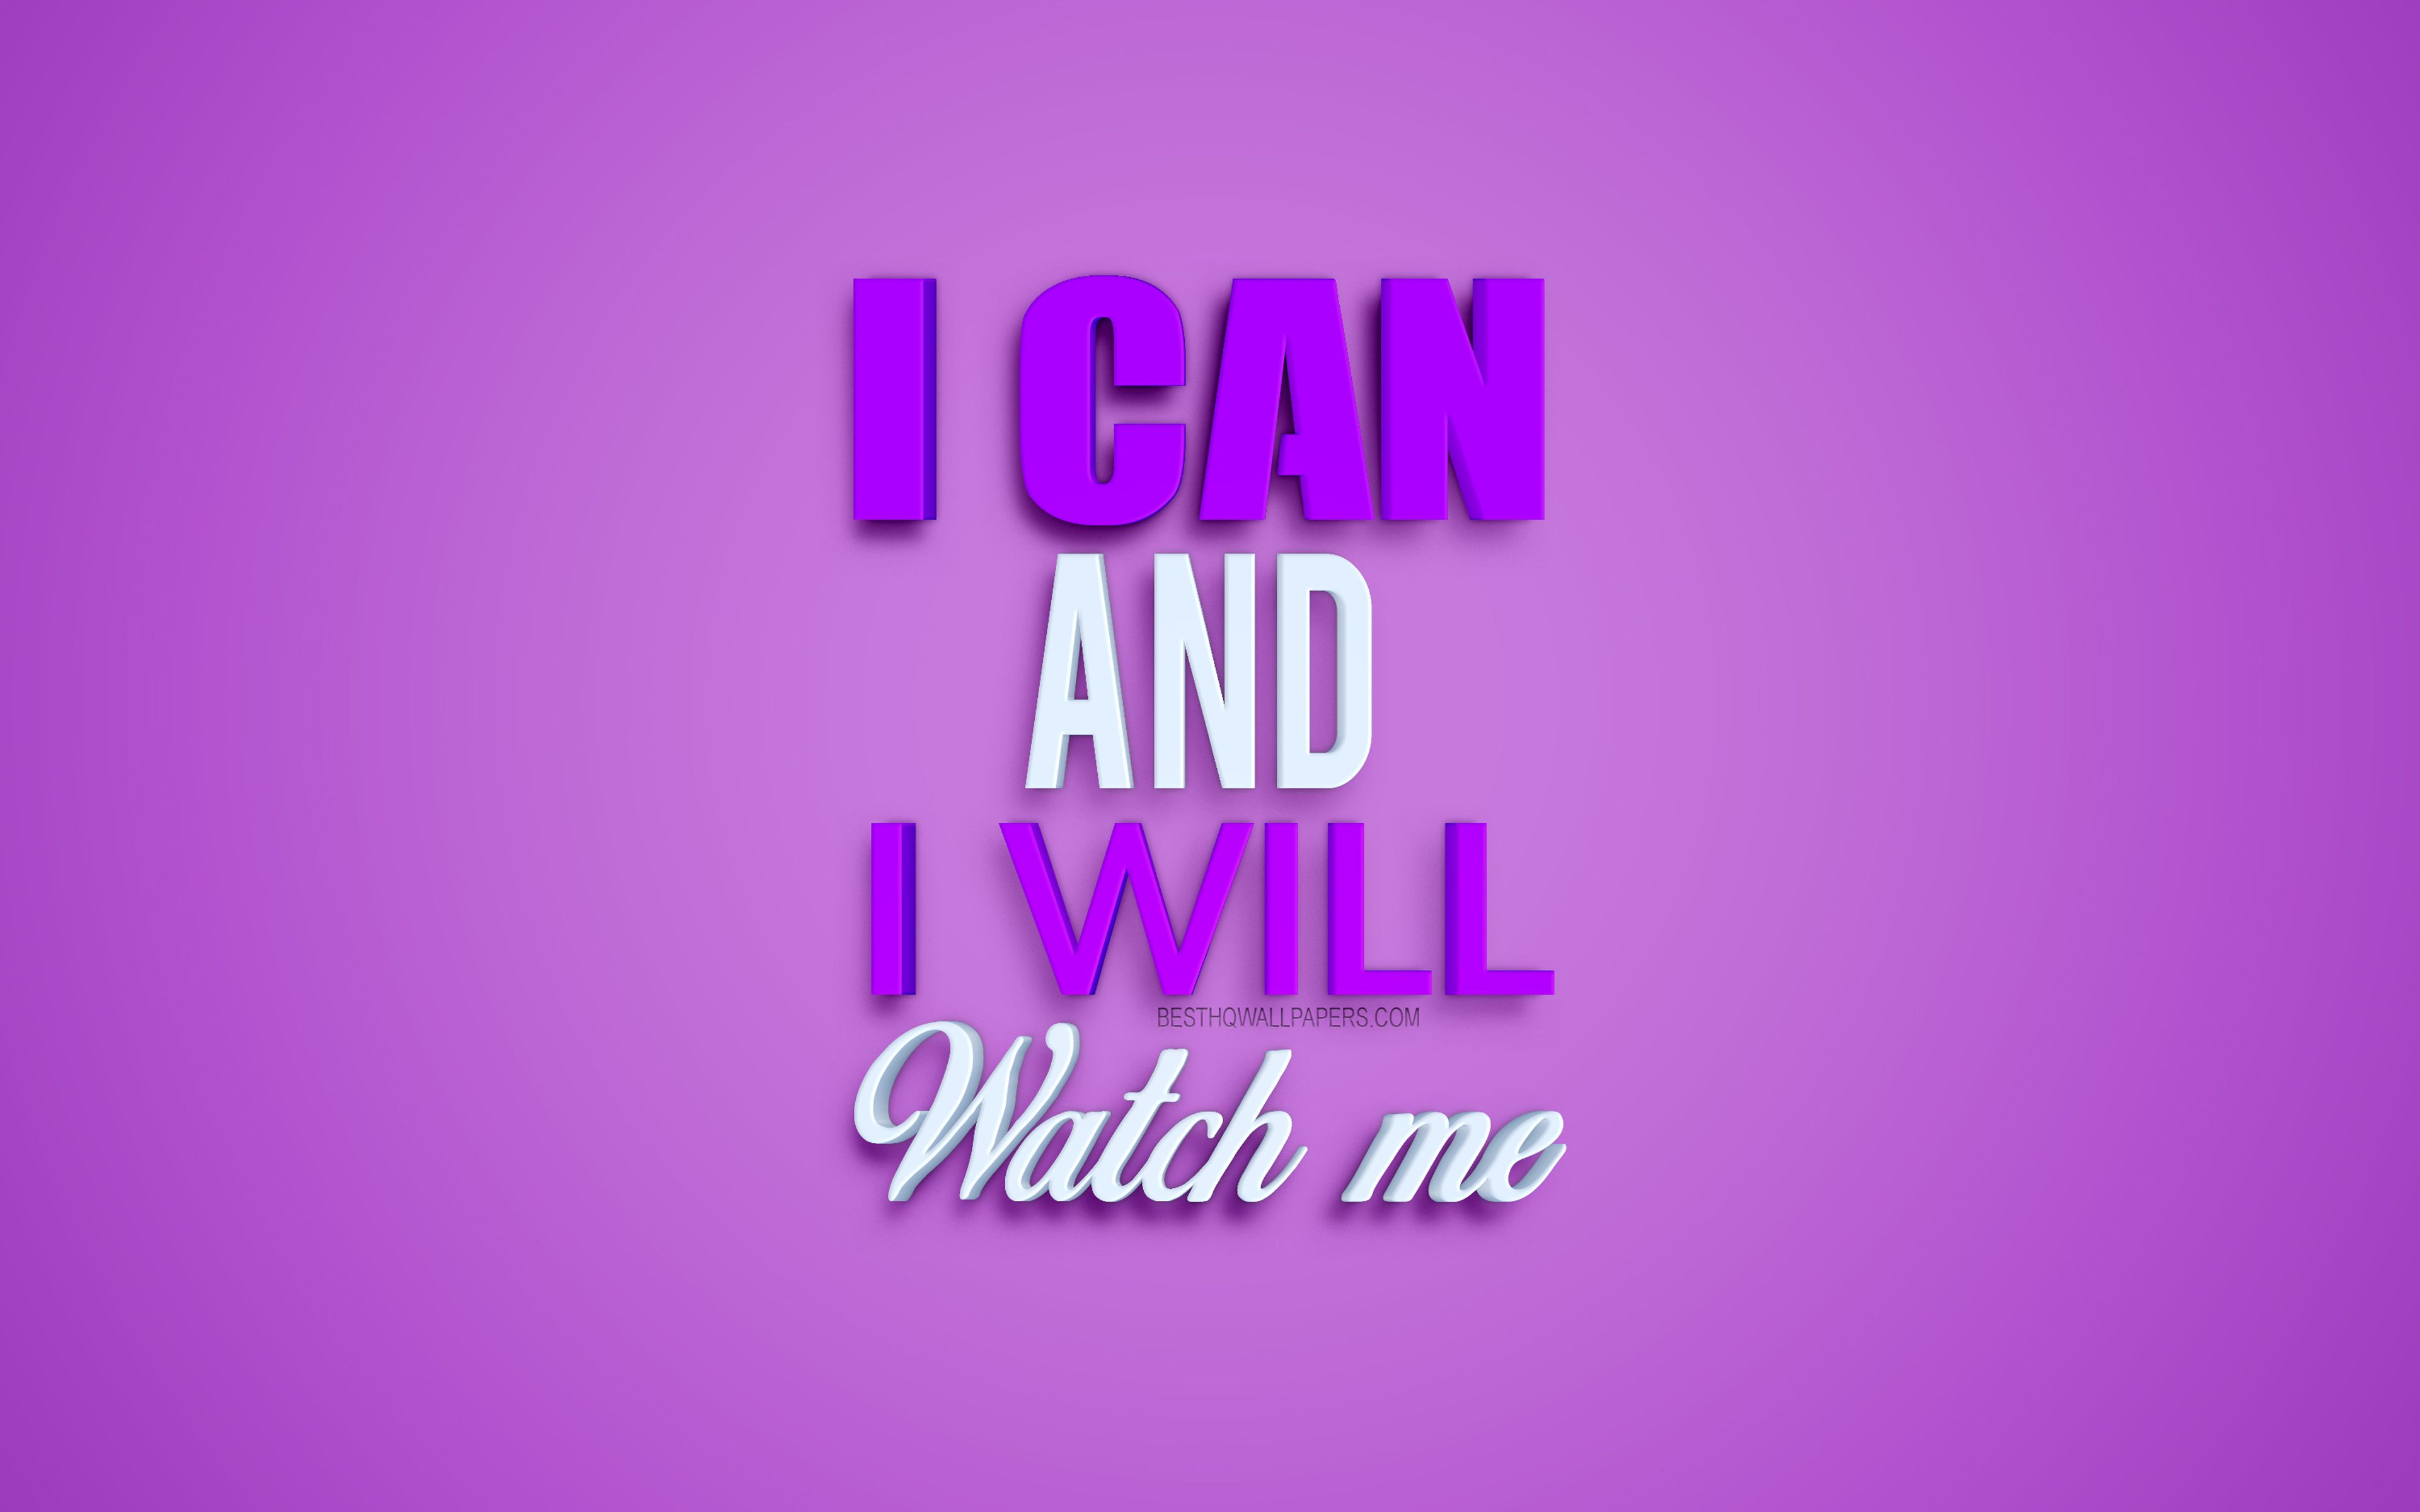 Download wallpaper I can and I will watch me, motivation quotes, business quotes, creative 3D art, purple background, short quotes, inspiration for desktop with resolution 3840x2400. High Quality HD picture wallpaper